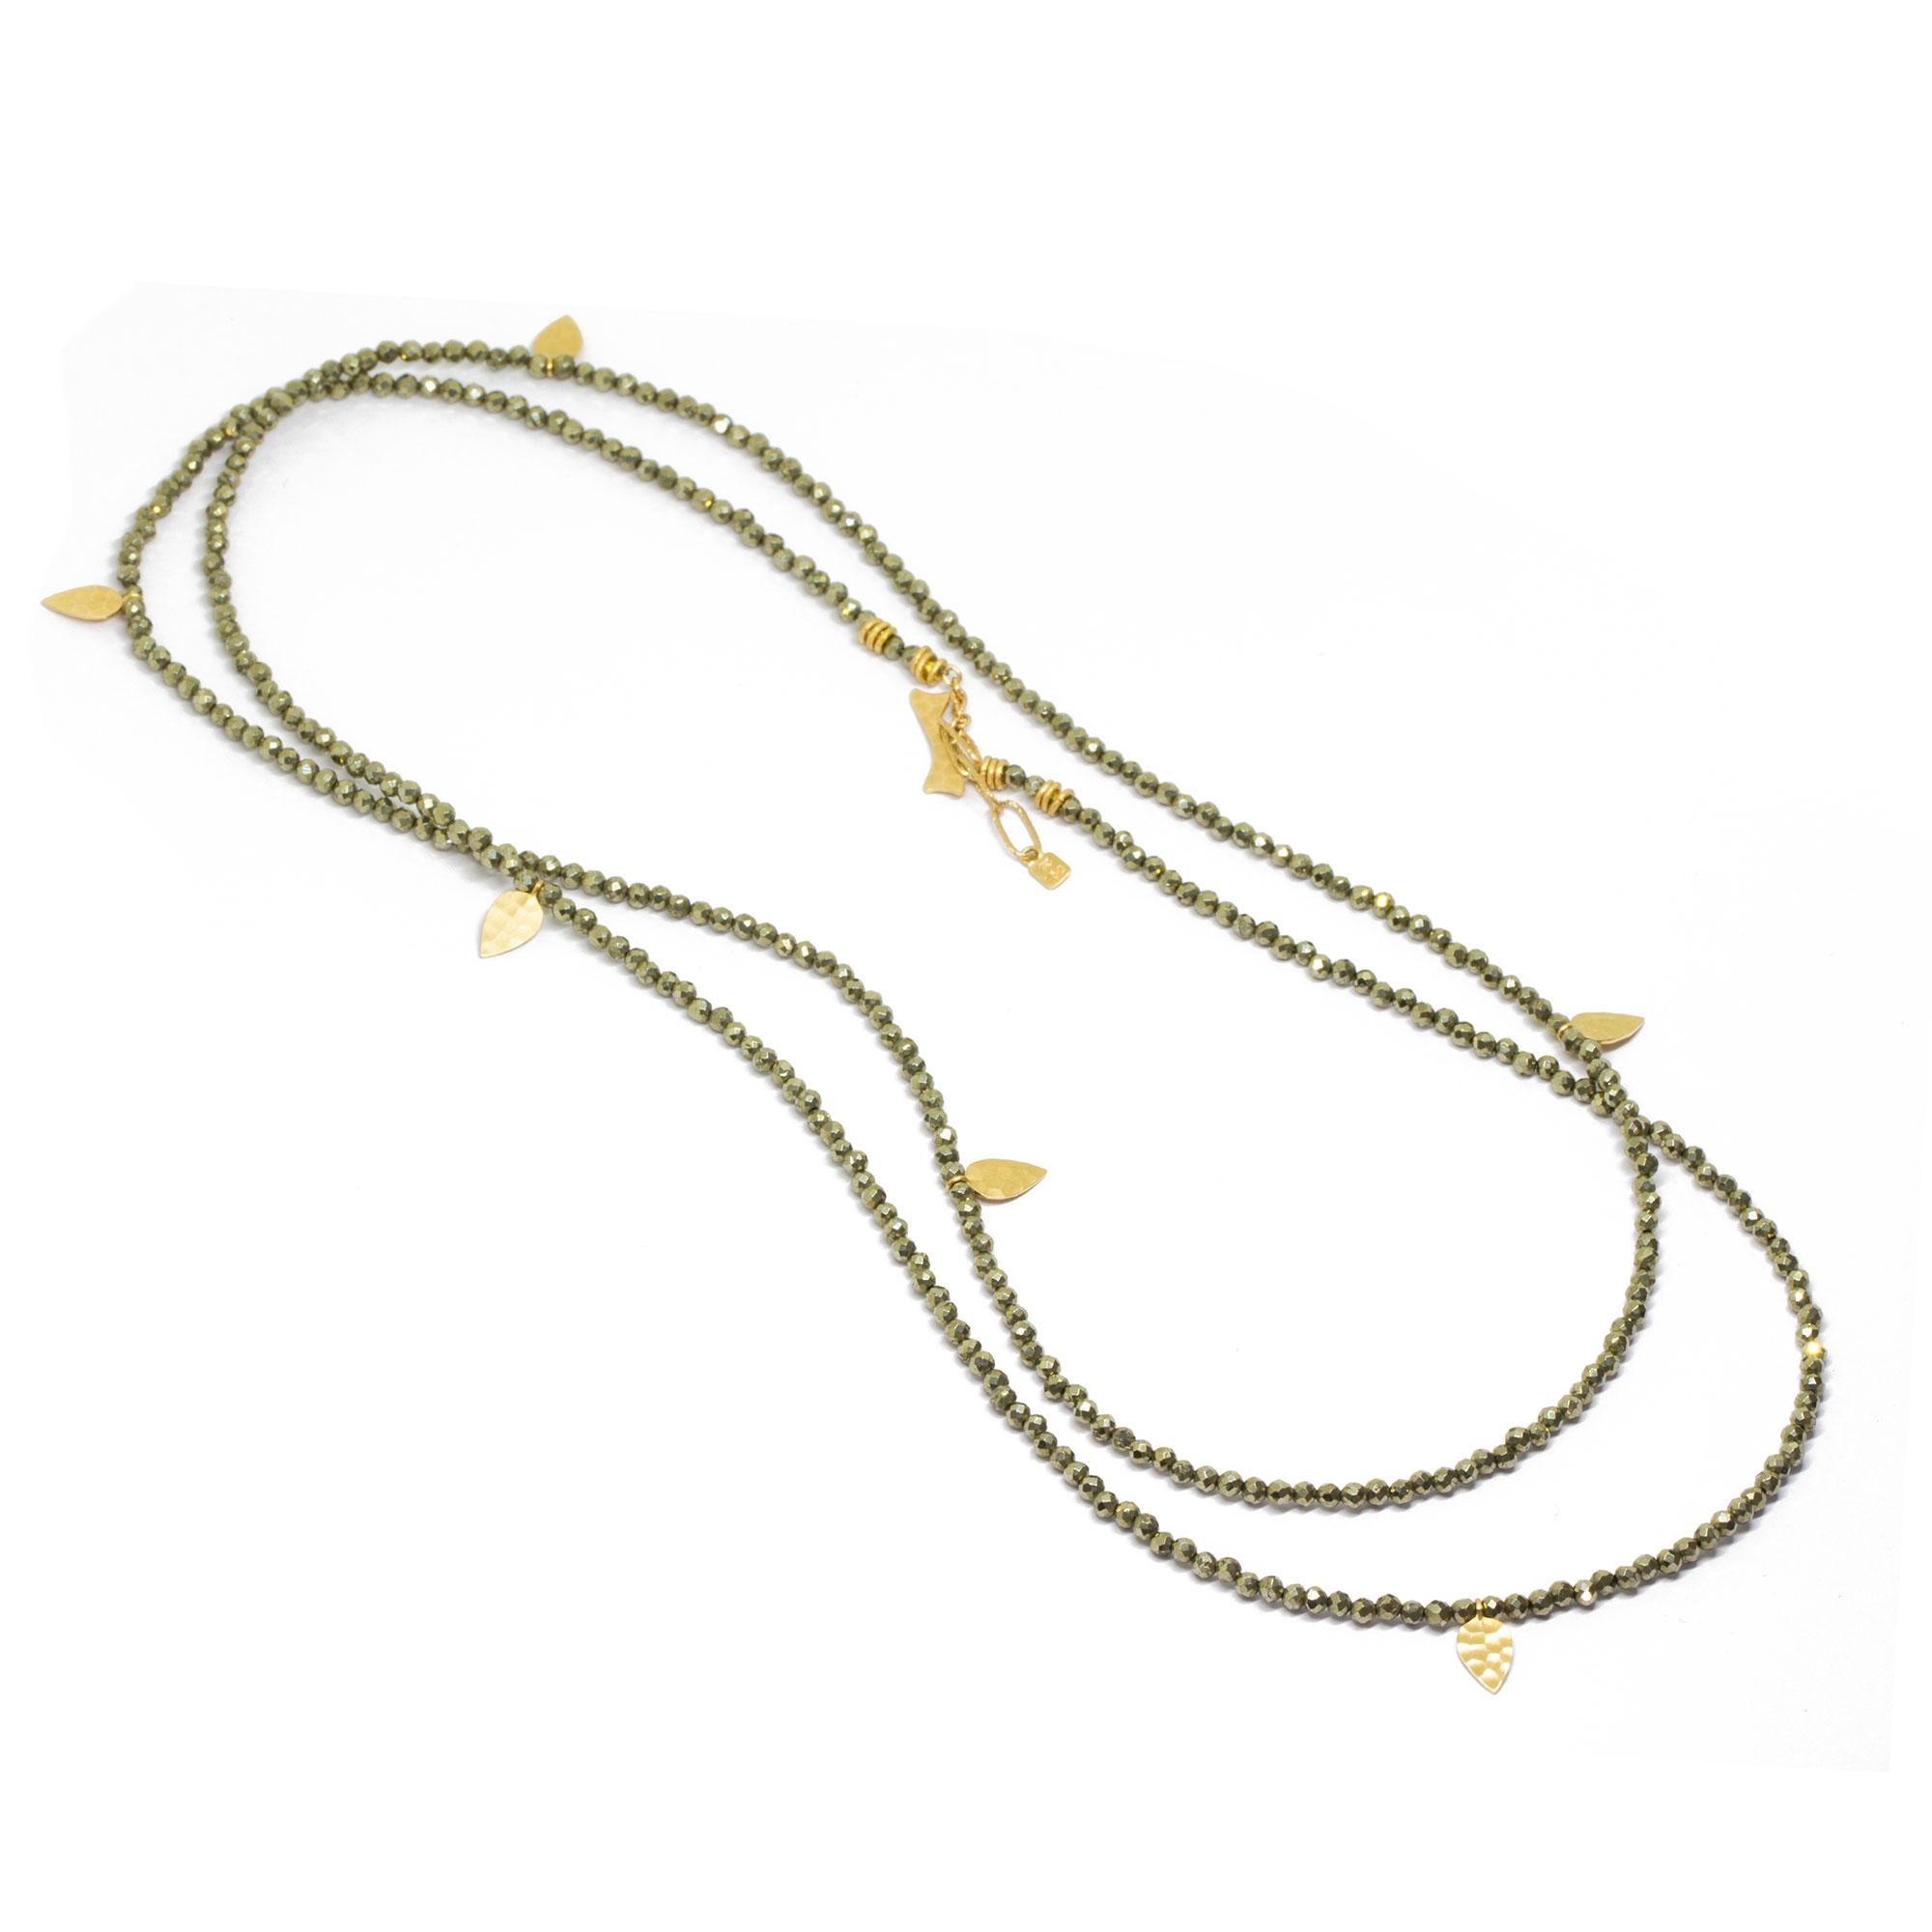 The best part about our Heritage Pyrite Necklette isn’t just that it can be worn long, doubled-up, or as a wrap bracelet (although that’s pretty cool). It’s that you can thread any of our Charms onto the pyrite beads—have fun playing with all the